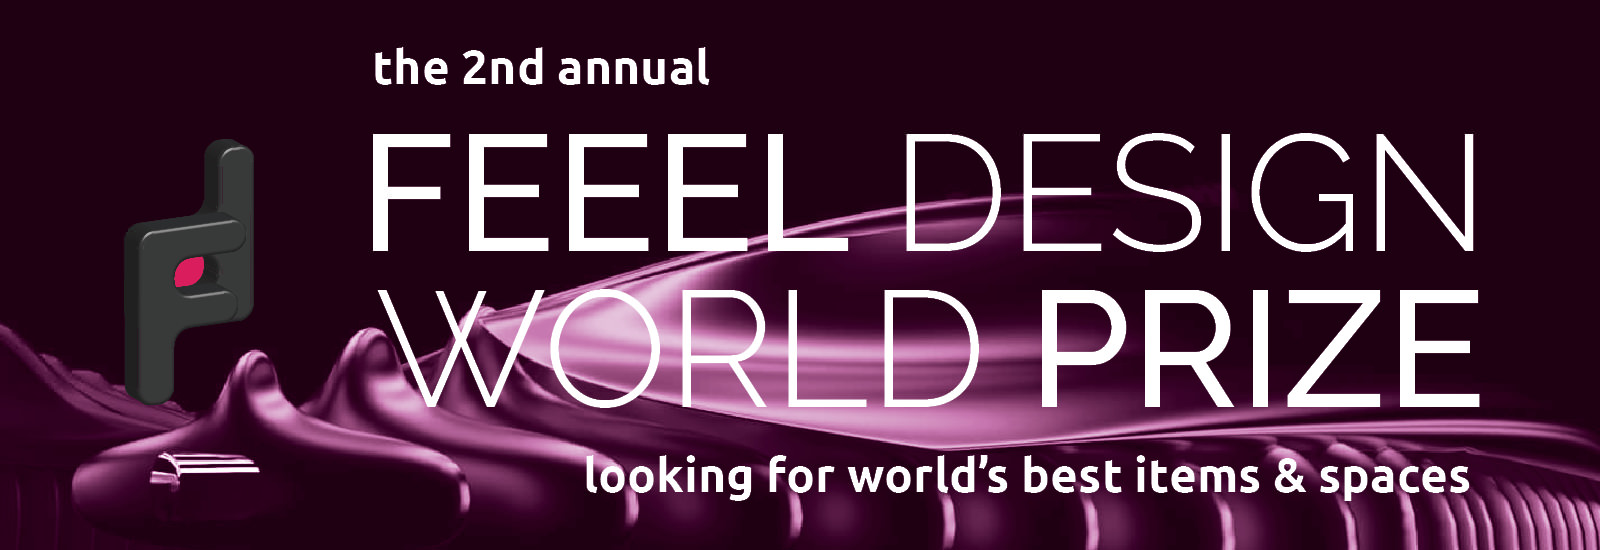 Feeel Design World Prize the 2nd annual